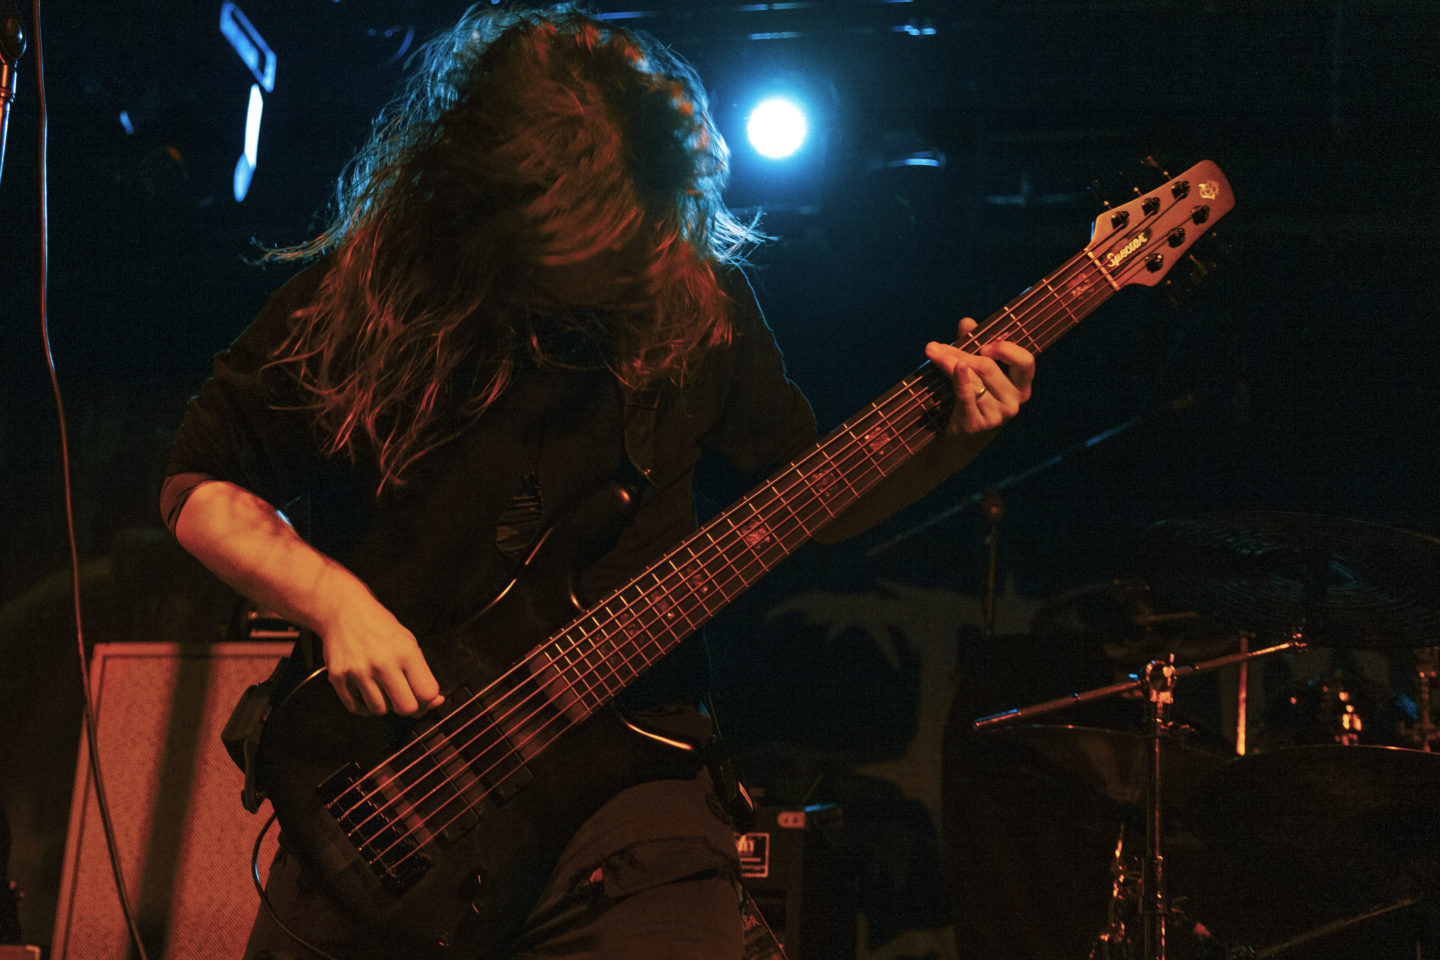 Rivers of Nihil at Concord Music Hall by Sanchi Engineer